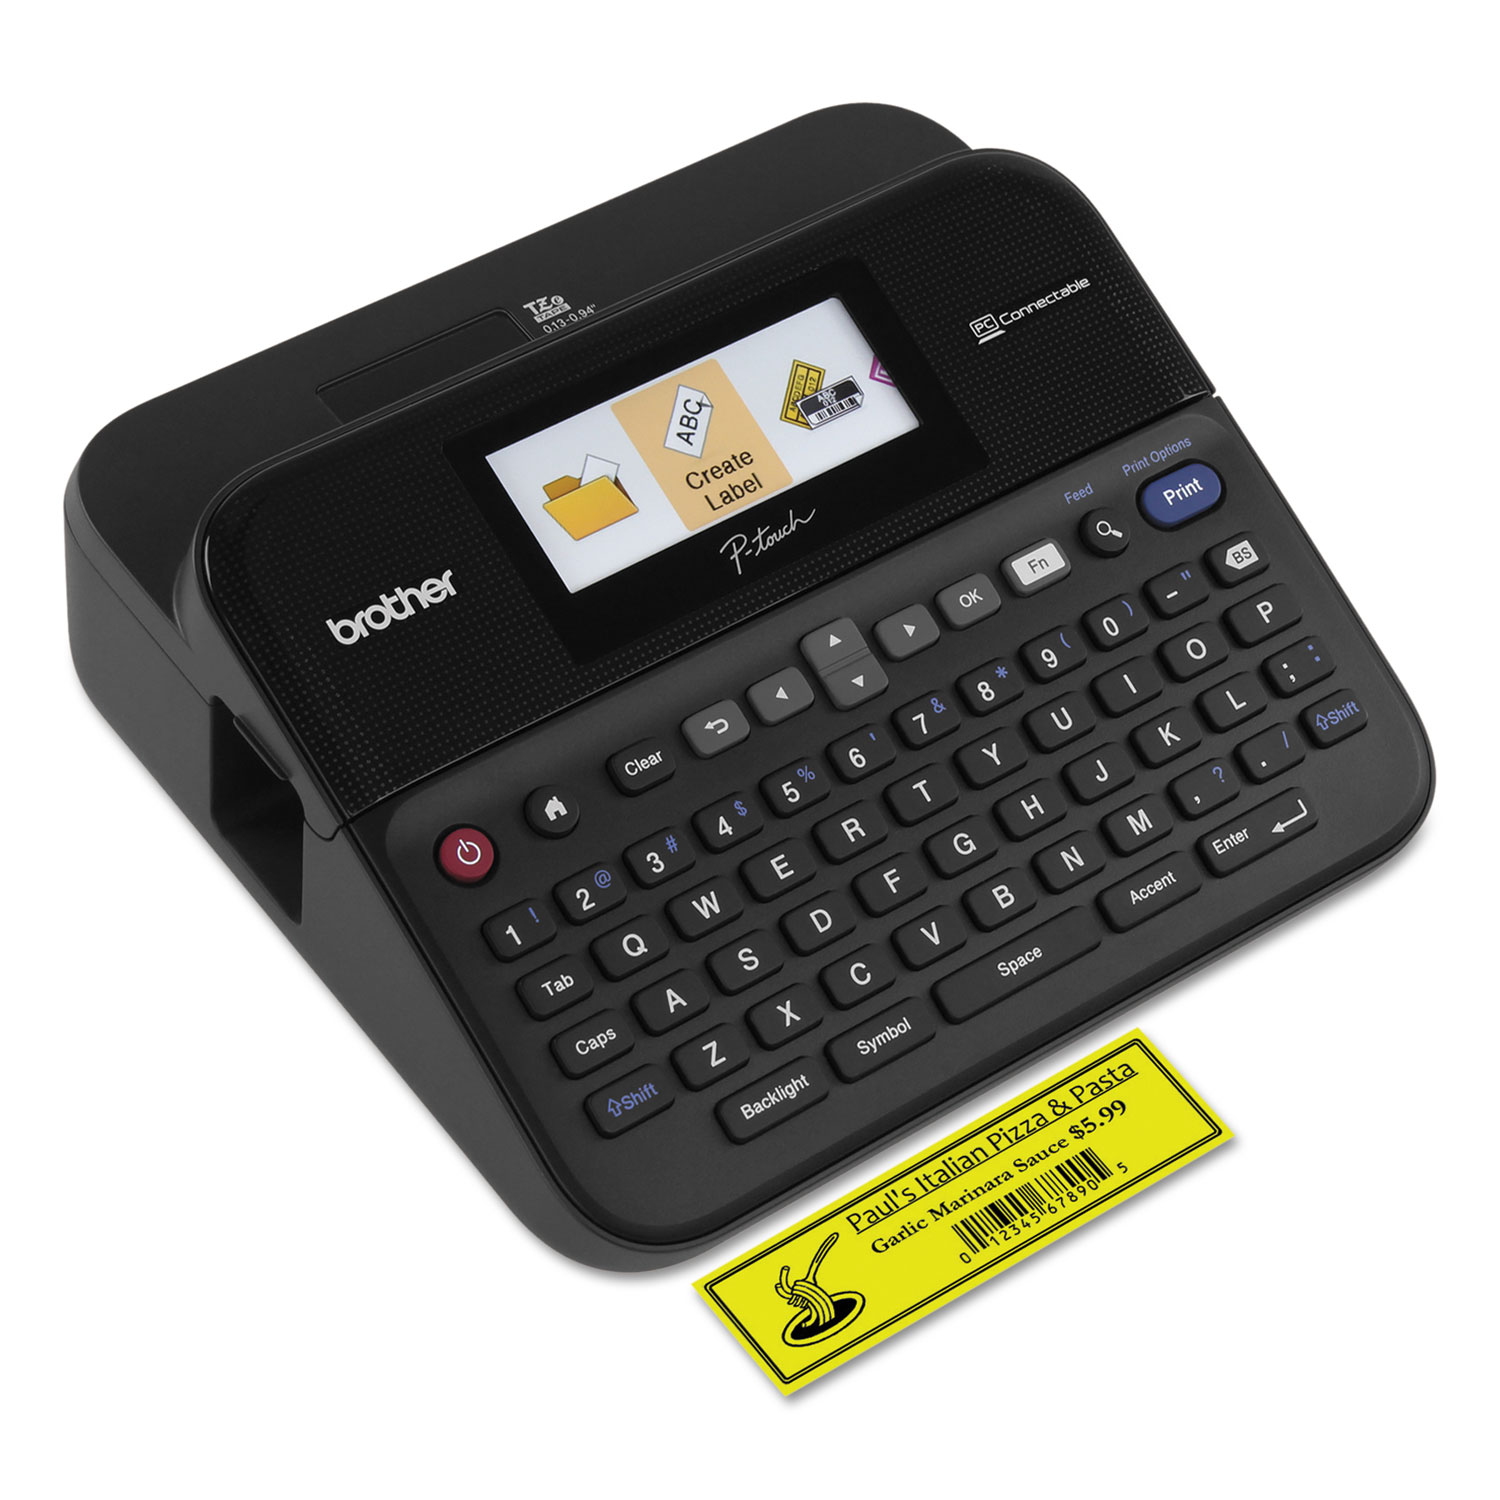 PT-D600 PC-Connectable Label Maker with Color Display, Black